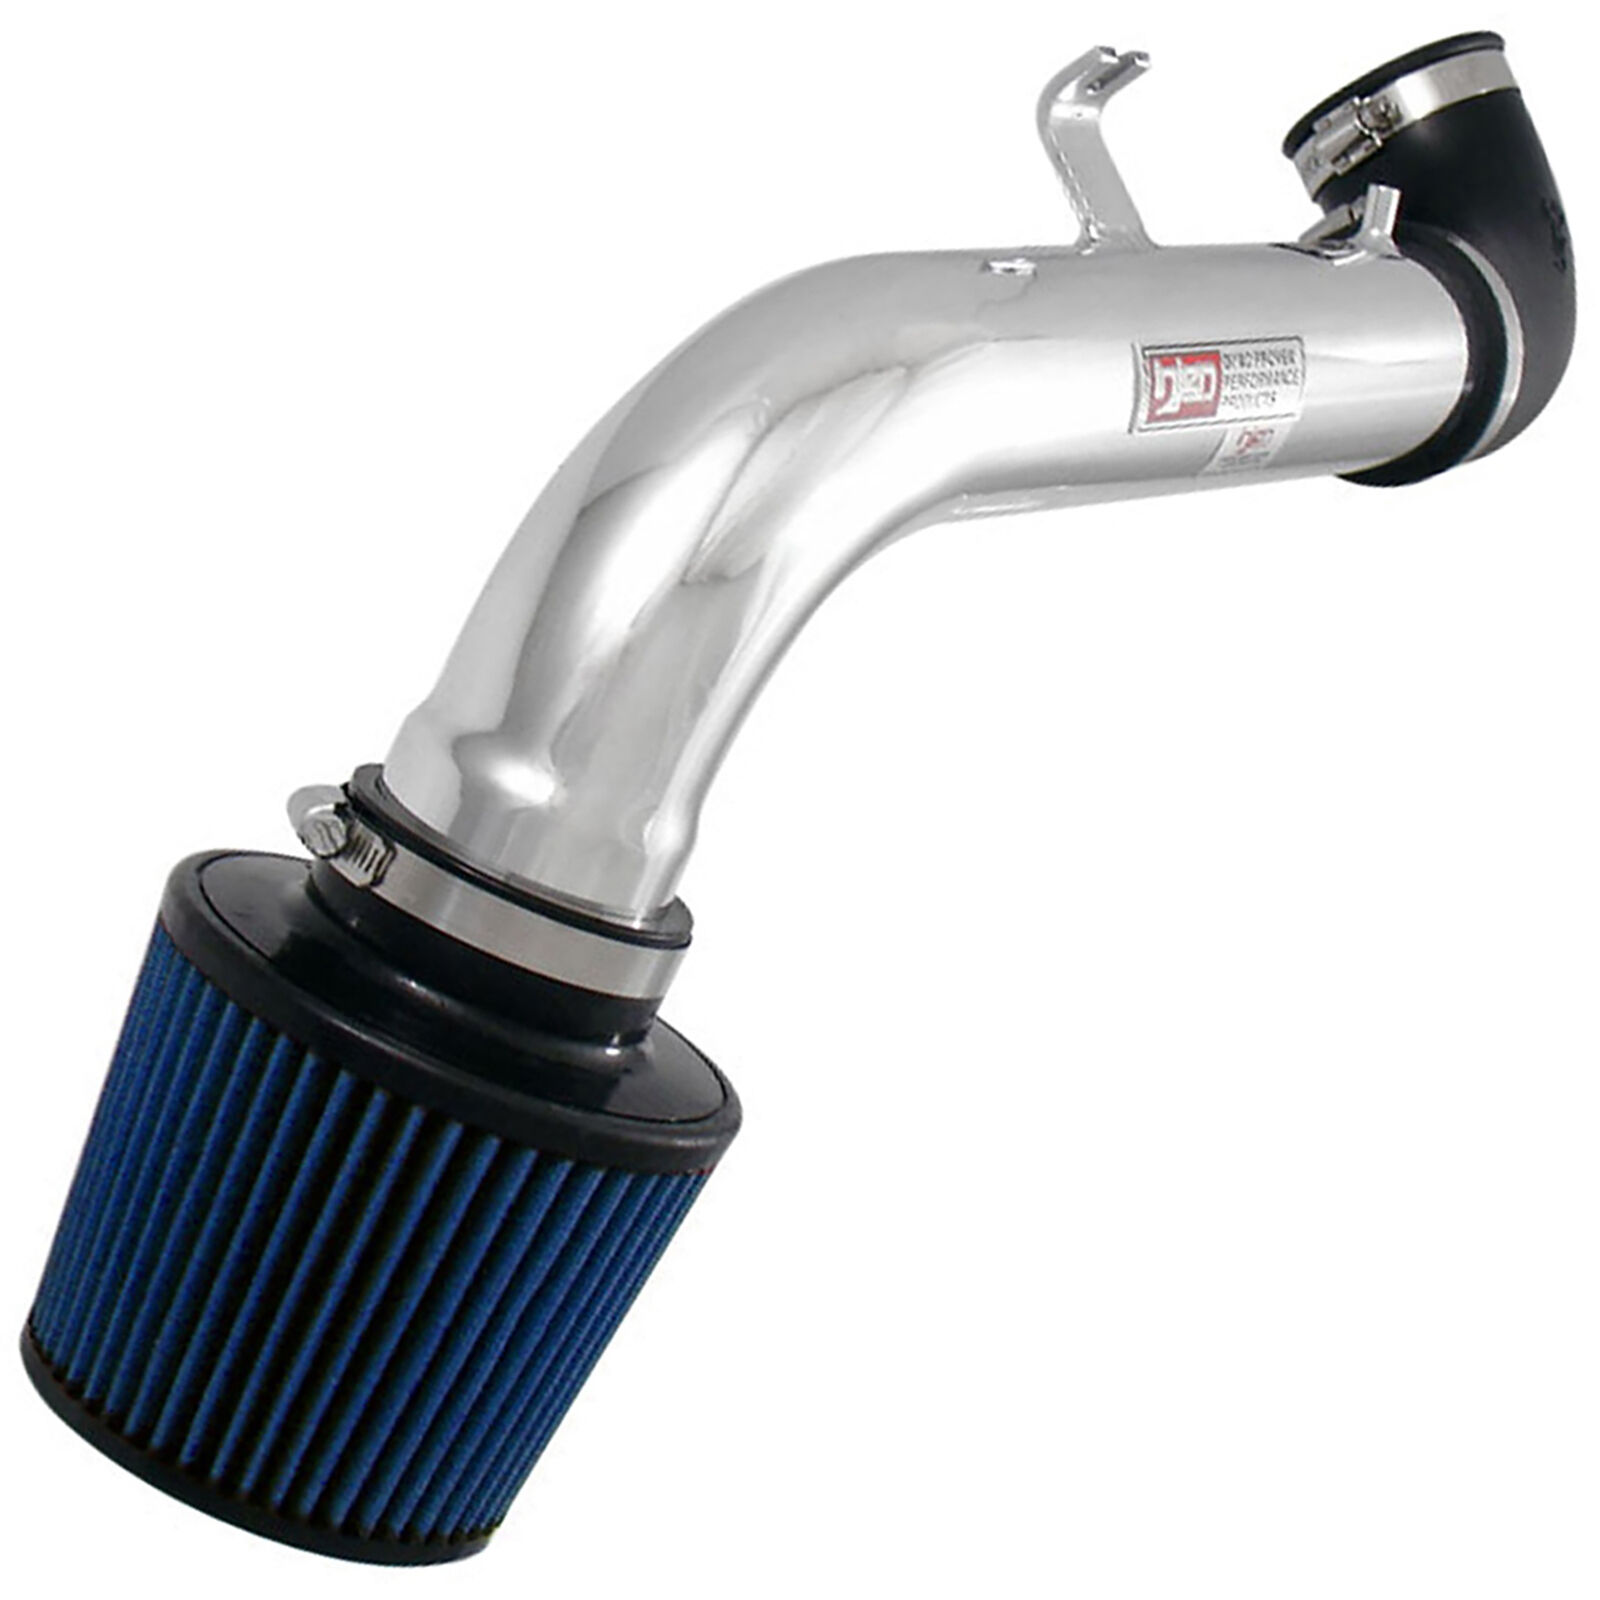 Injen IS1880P Short Ram Cold Air Intake System for 95-99 Mitsubishi Eclipse 2.0L